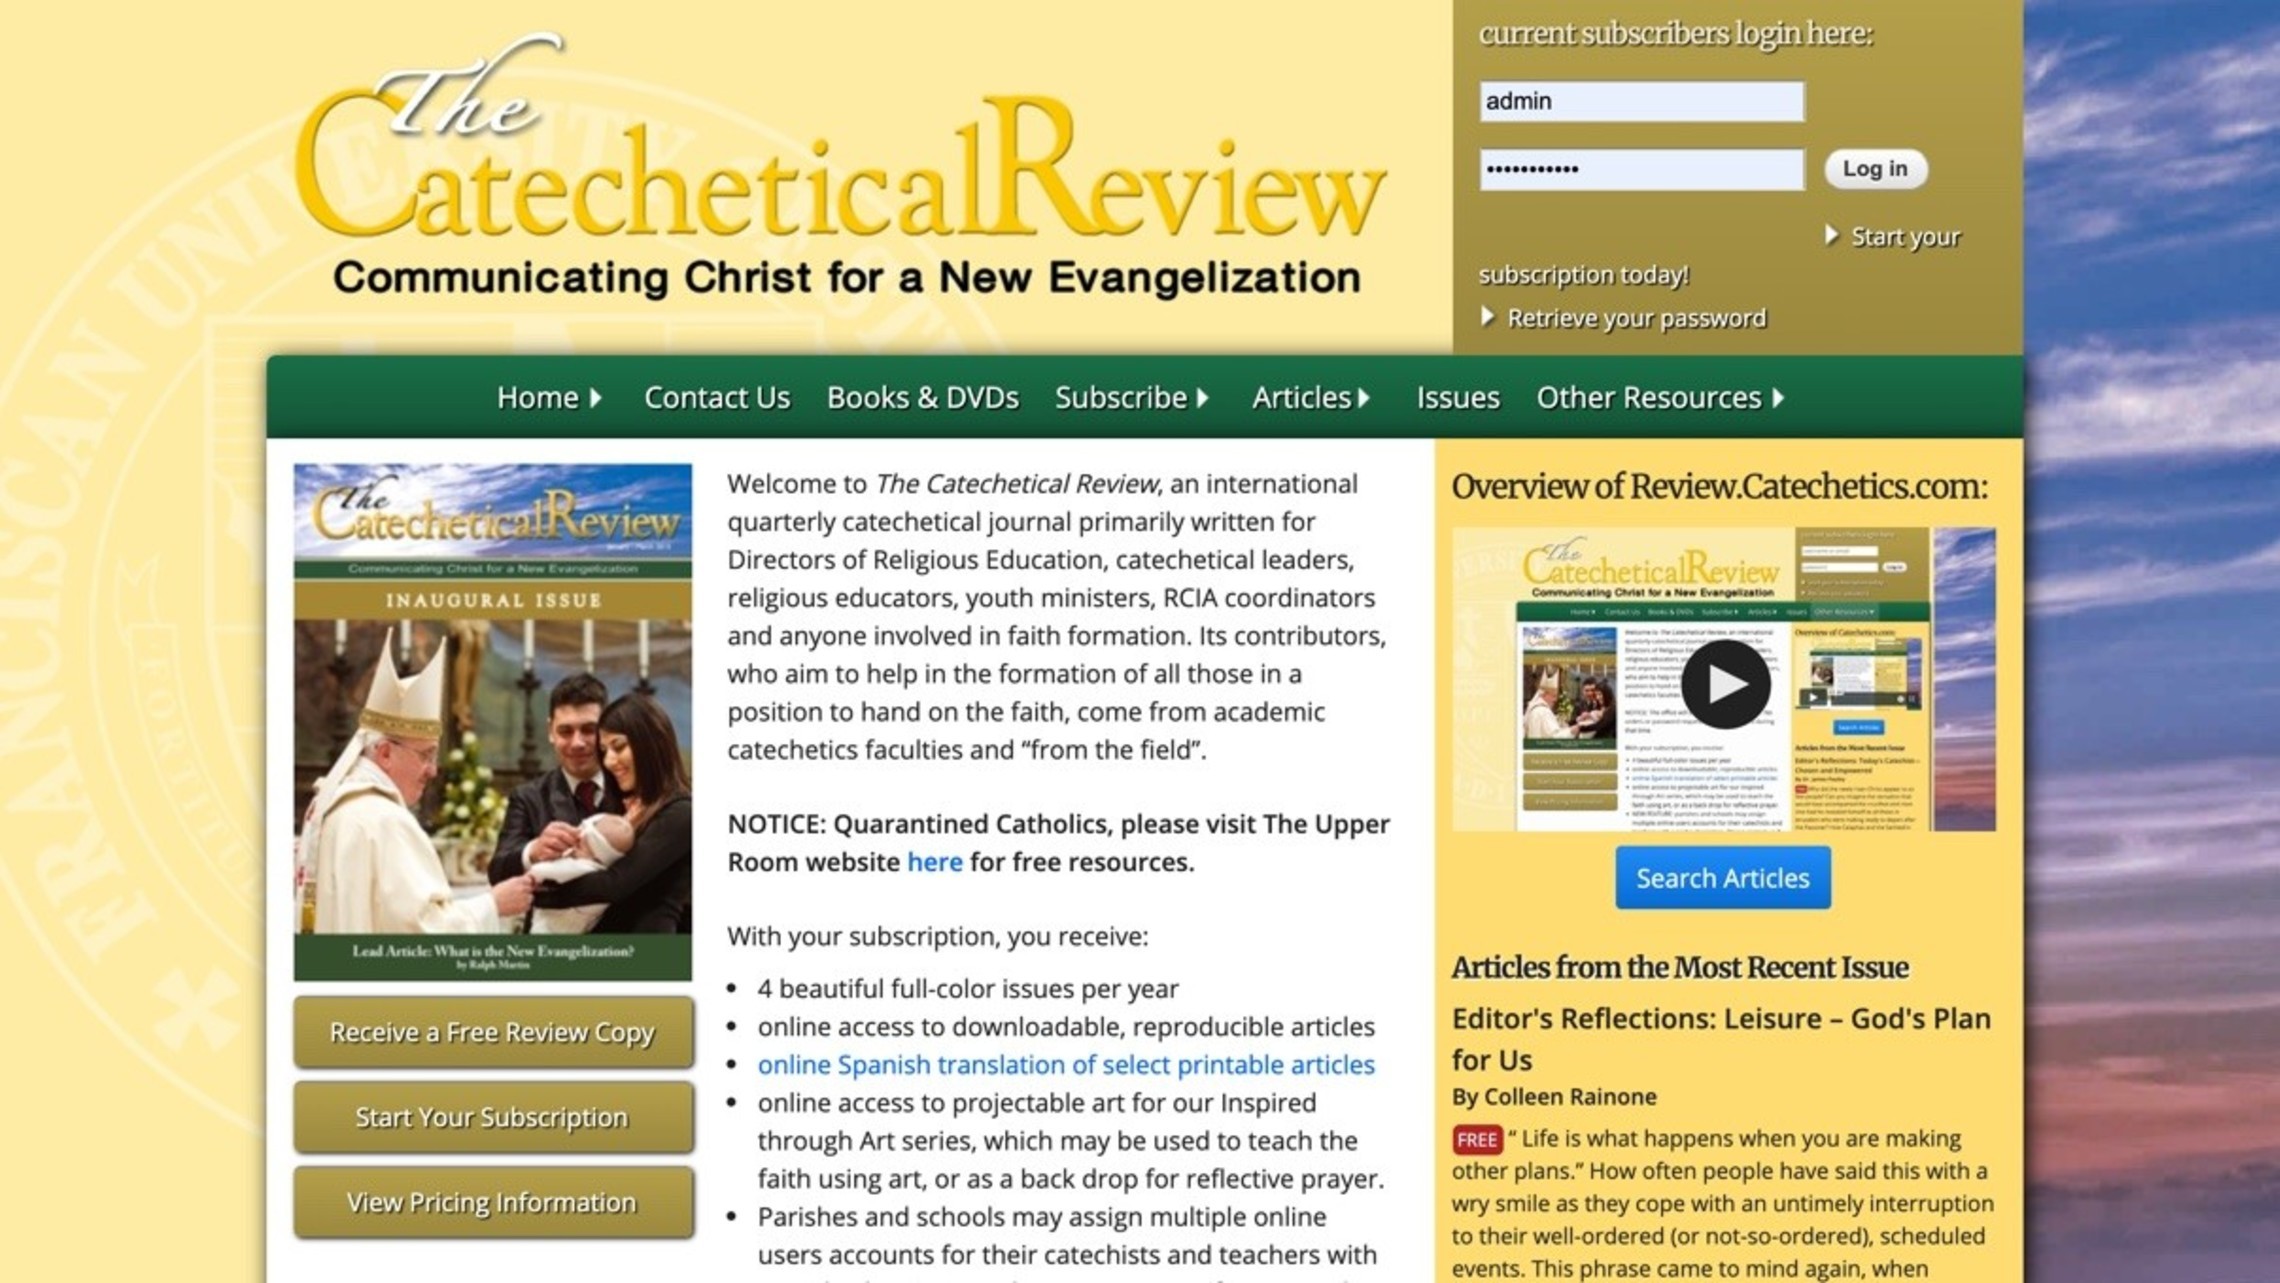 The Catechetical Review